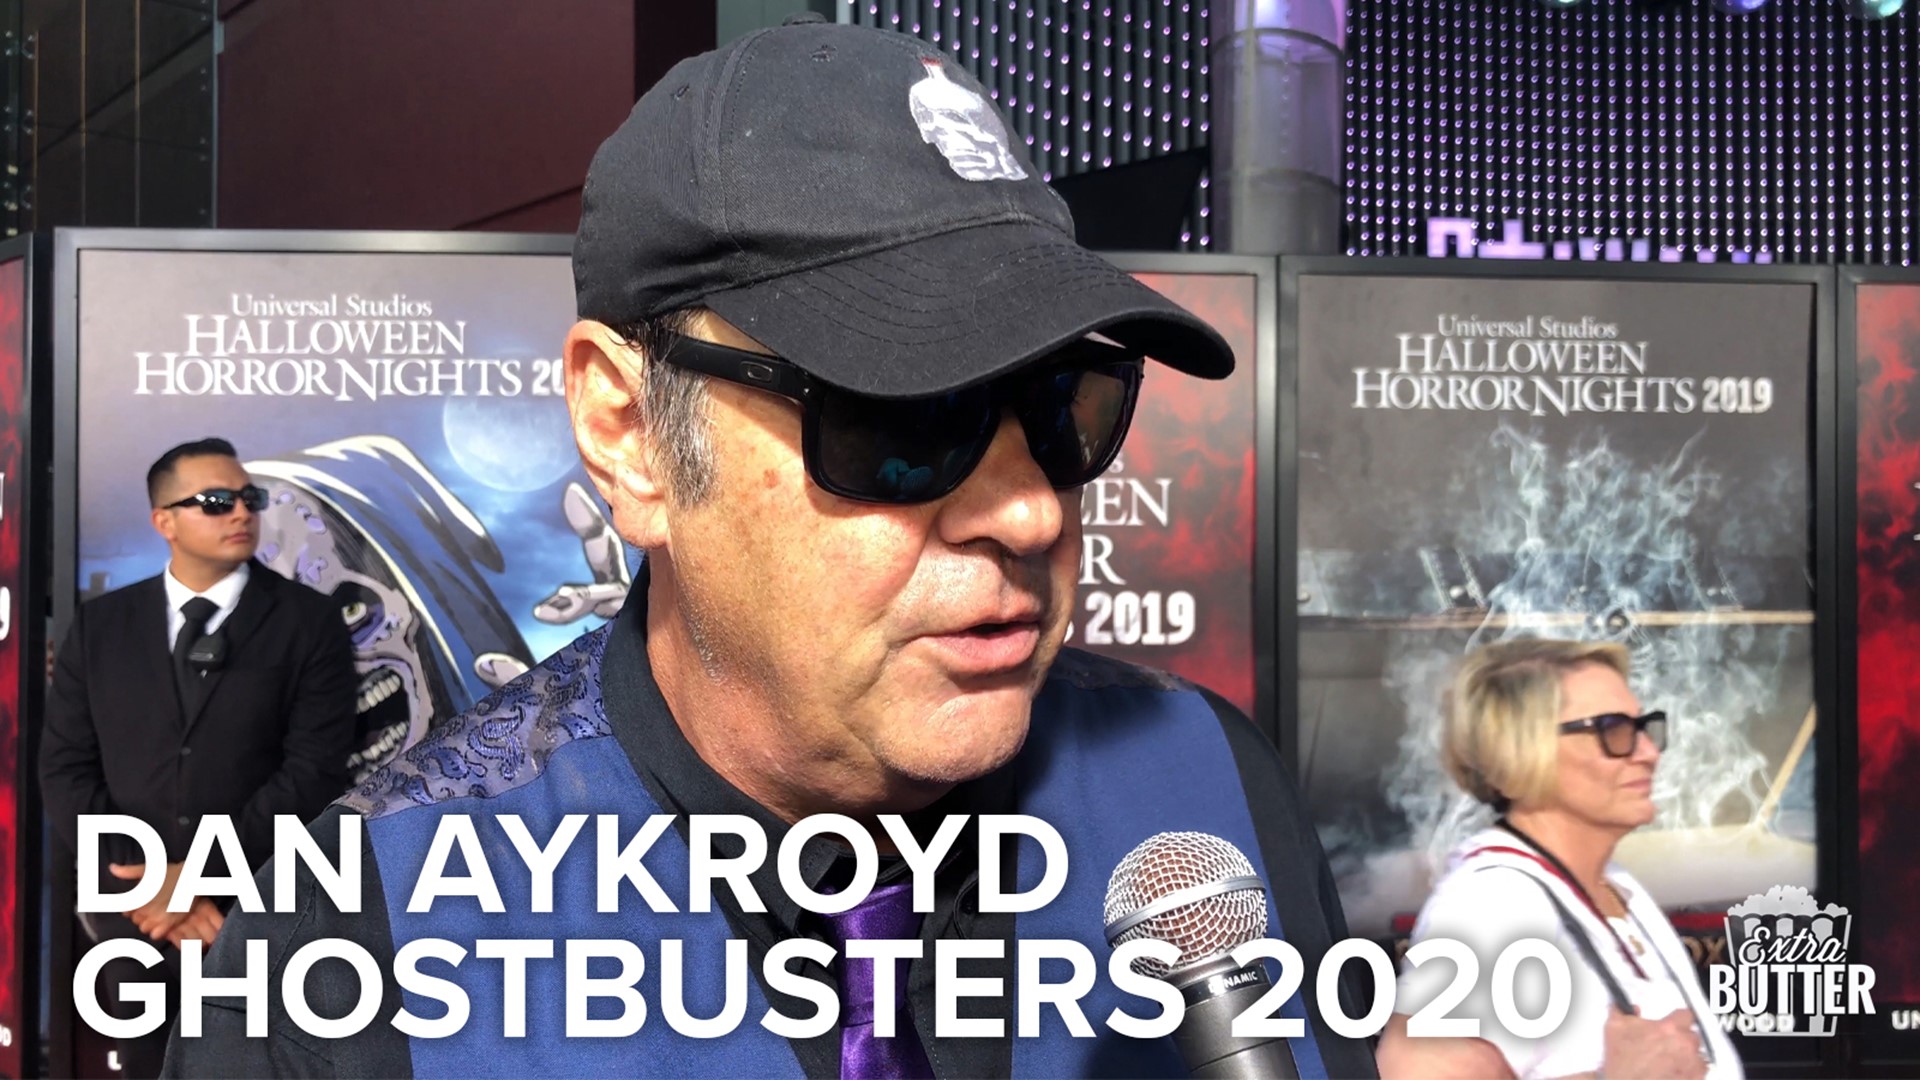 Dan Aykroyd talks about 'Ghostbusters 2020' and reminisces with Mark S. Allen about shooting the original 'Ghostbusters.'